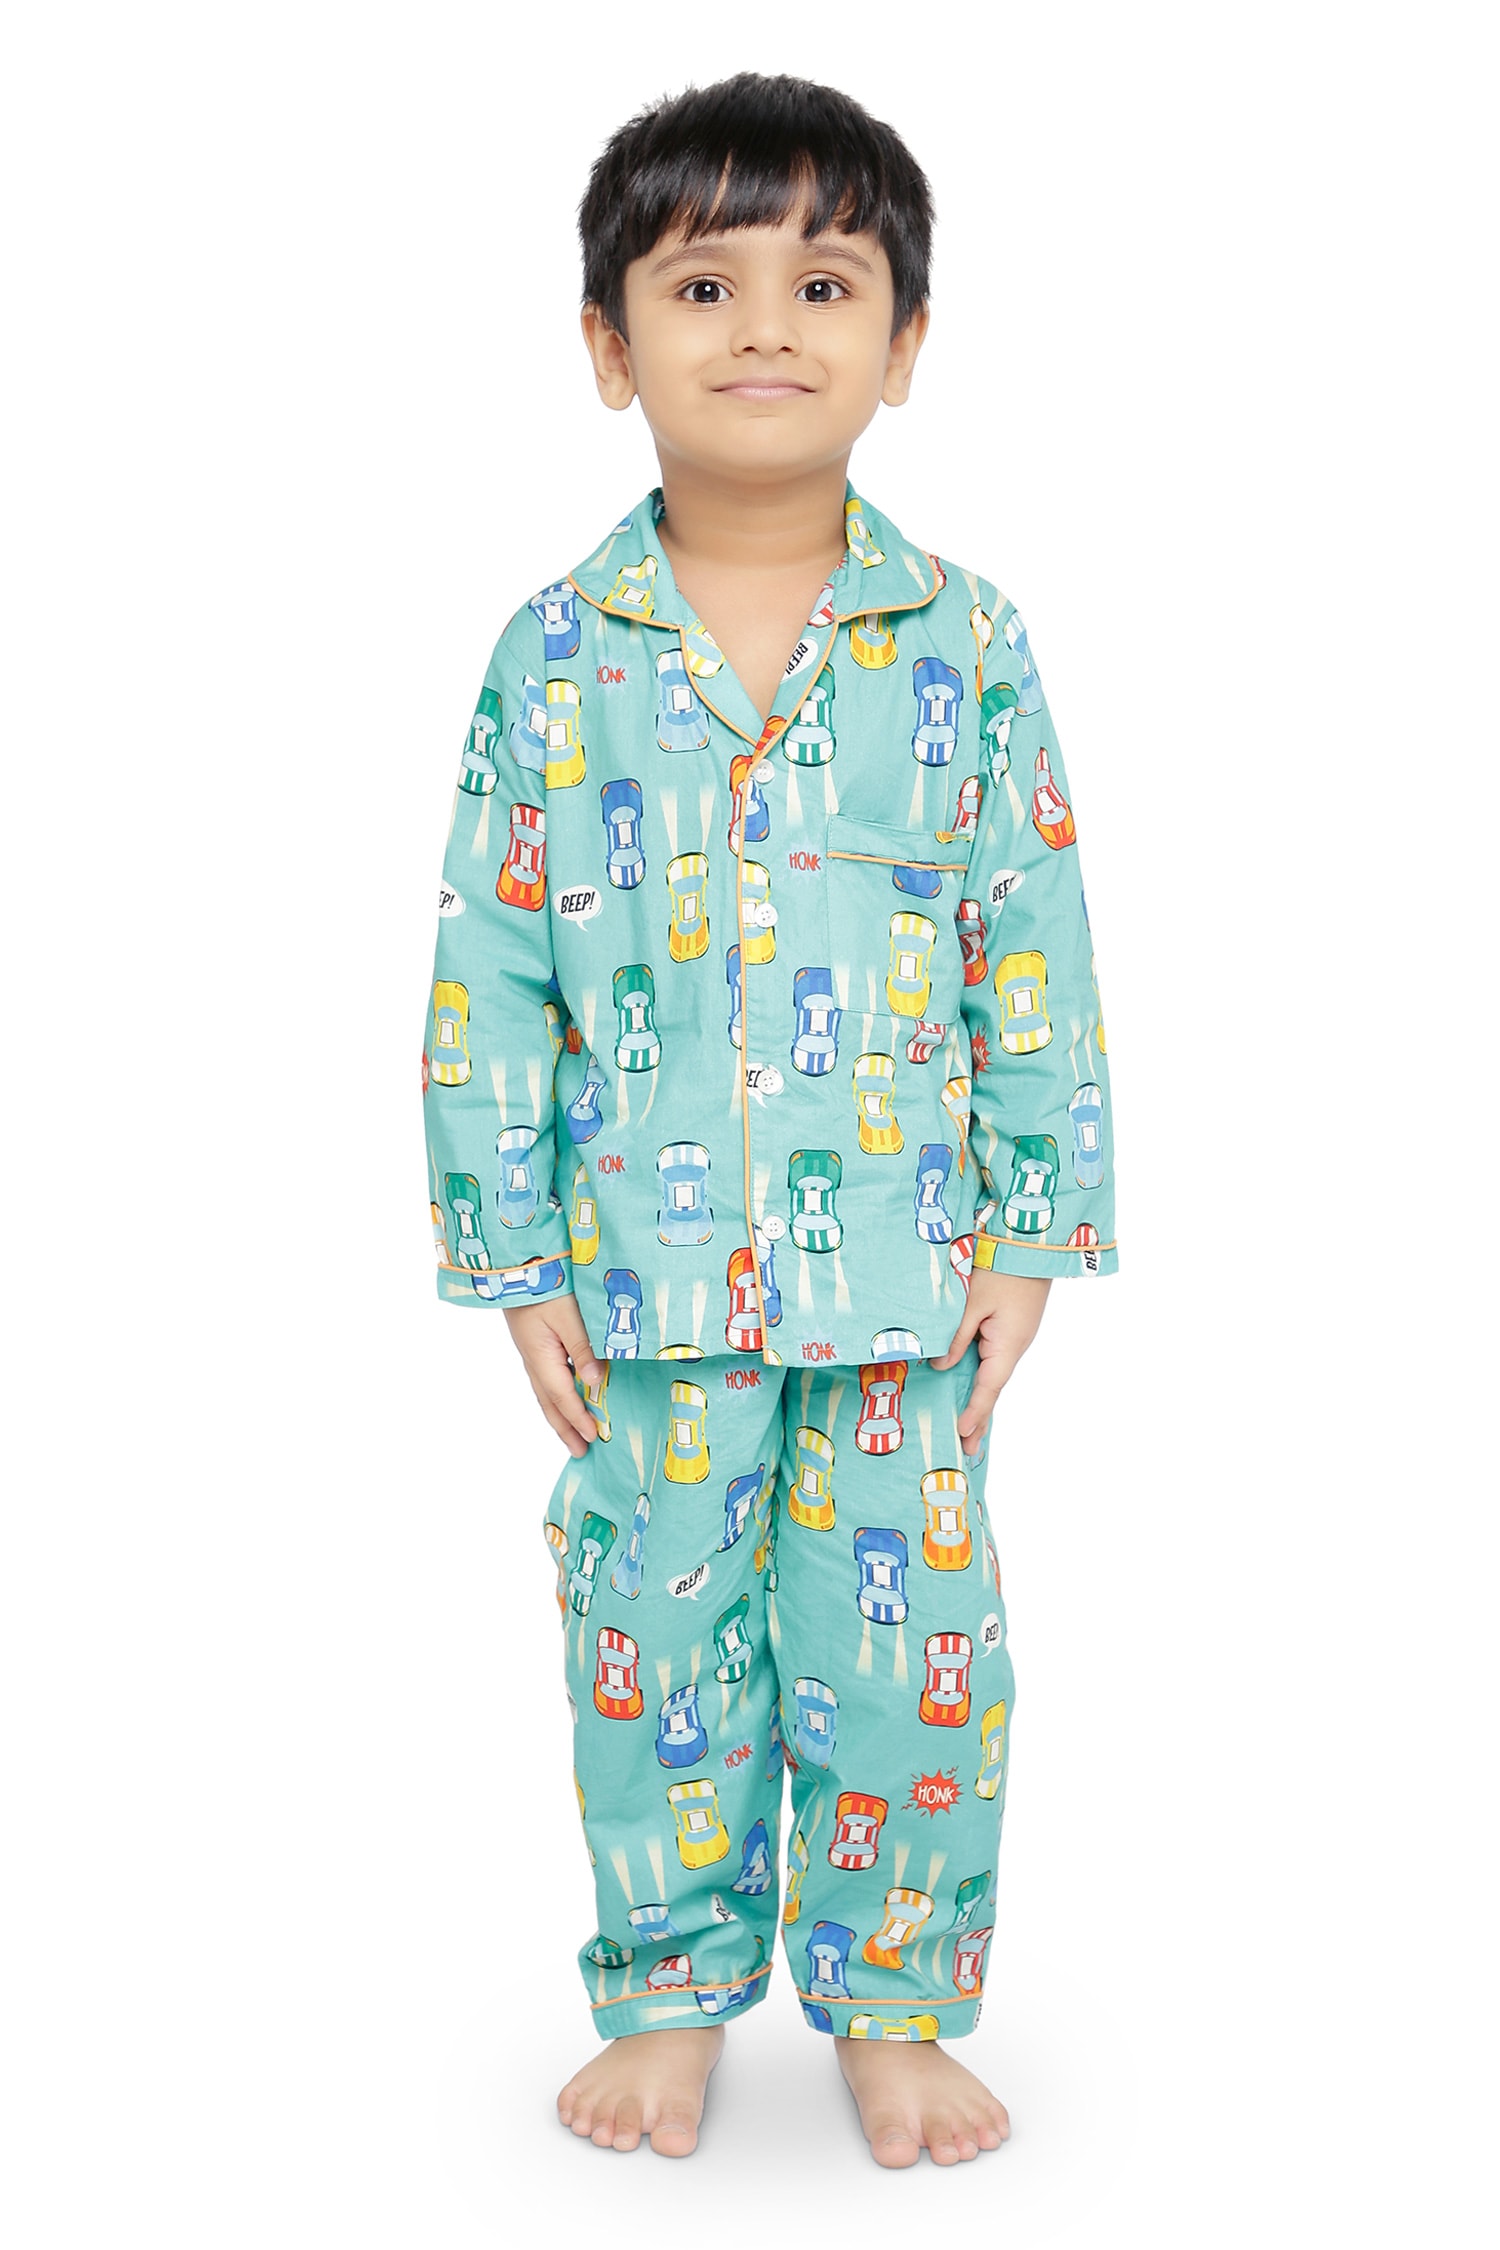 Buy Hippodrome Kids Night Suit Pure Cotton Set of Printed Pyjama and Full  Sleeves Shirt, for Baby Boys and Girls (12-18 Months, Jungle Jamboree) at  Amazon.in